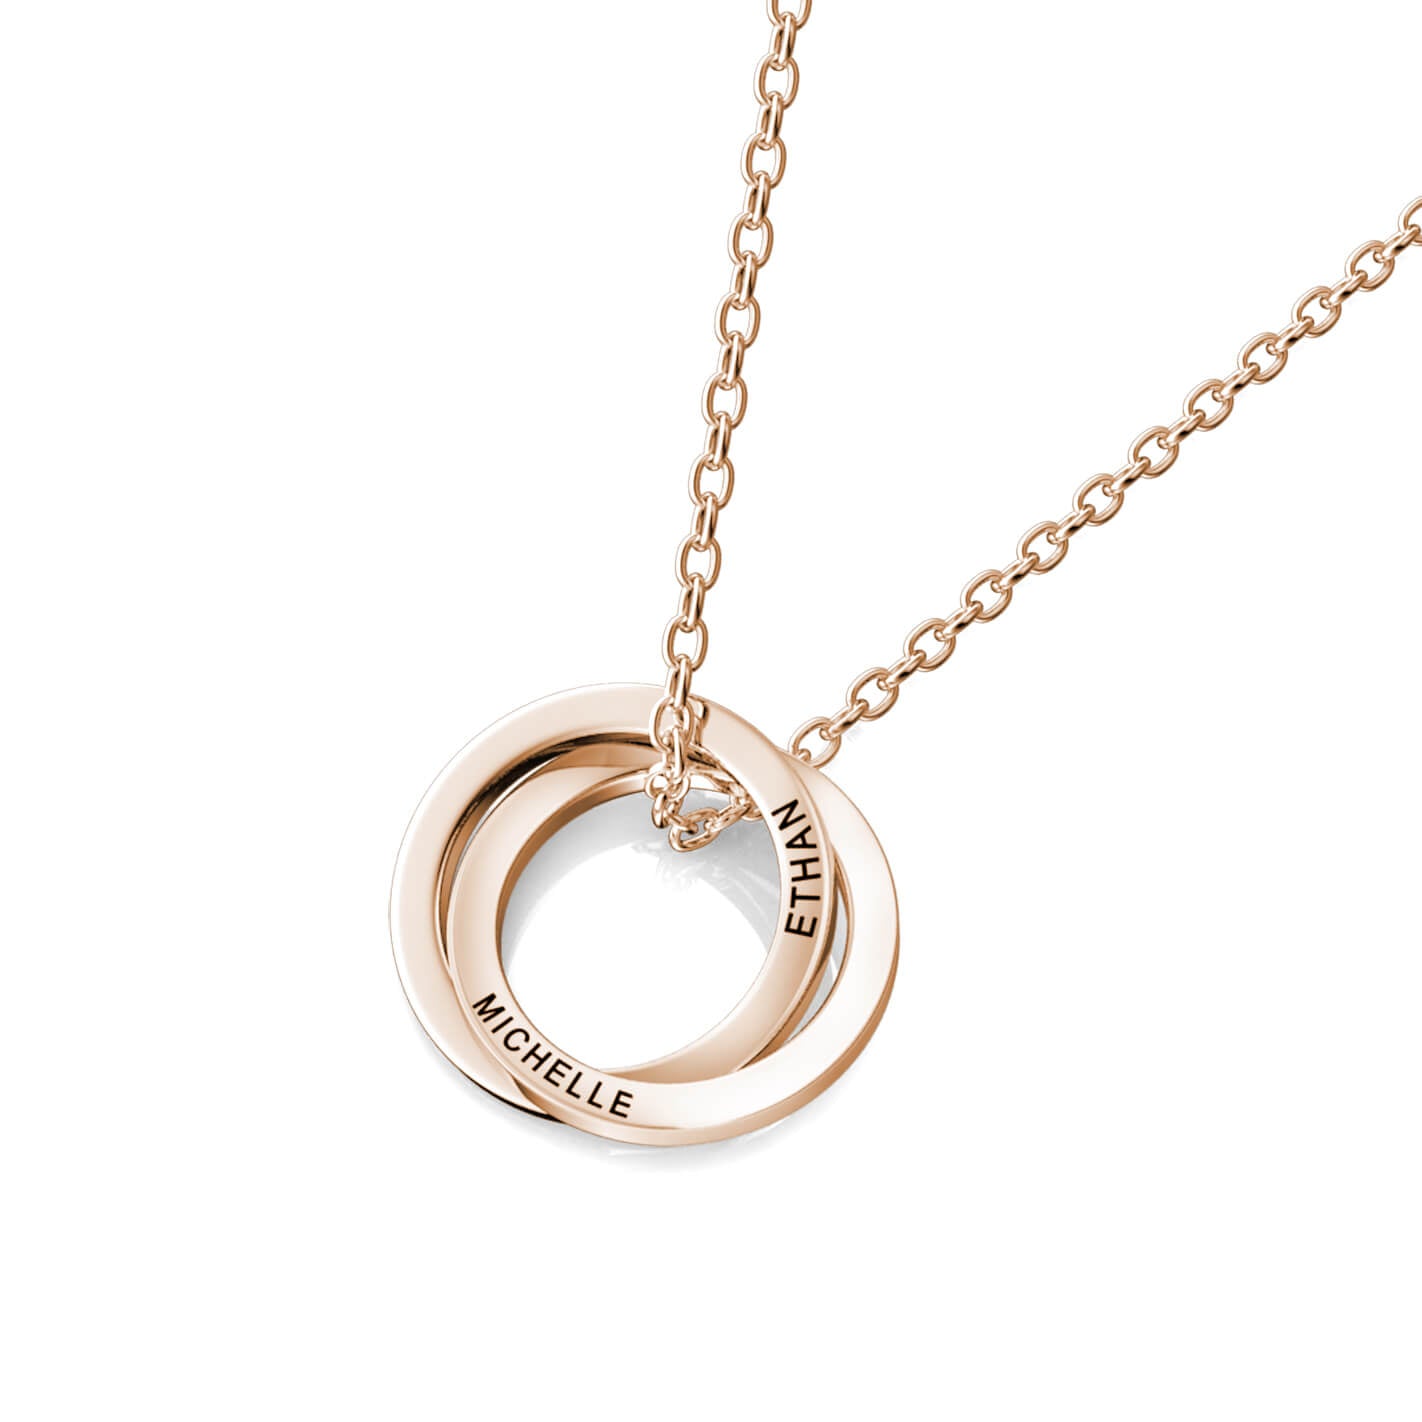 Personalised Russian 2 Rings Engraved Necklace for Grandma & Mum